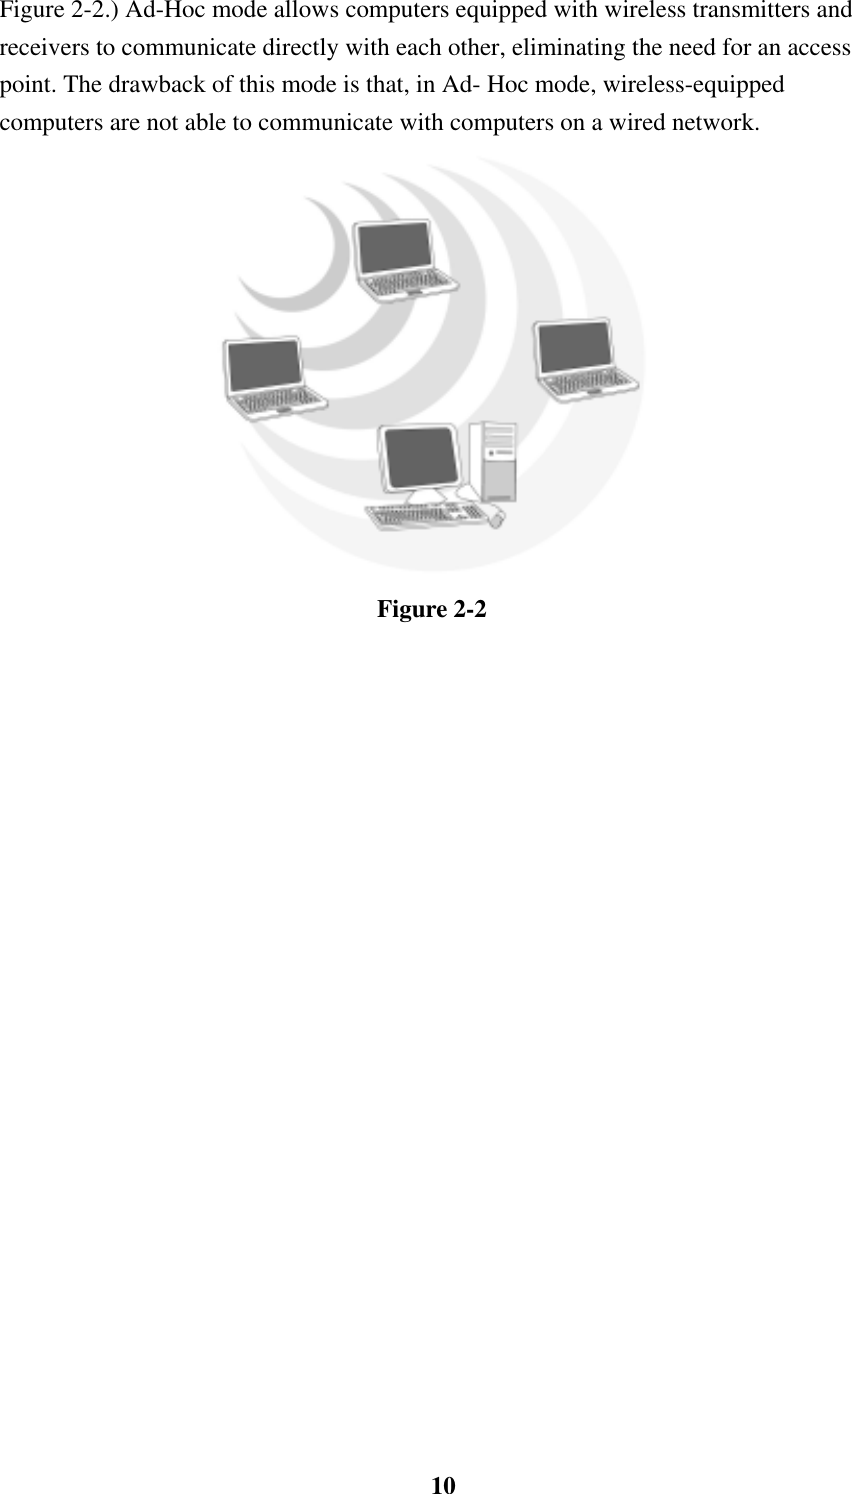    10Figure 2-2.) Ad-Hoc mode allows computers equipped with wireless transmitters and receivers to communicate directly with each other, eliminating the need for an access point. The drawback of this mode is that, in Ad- Hoc mode, wireless-equipped computers are not able to communicate with computers on a wired network.    Figure 2-2 